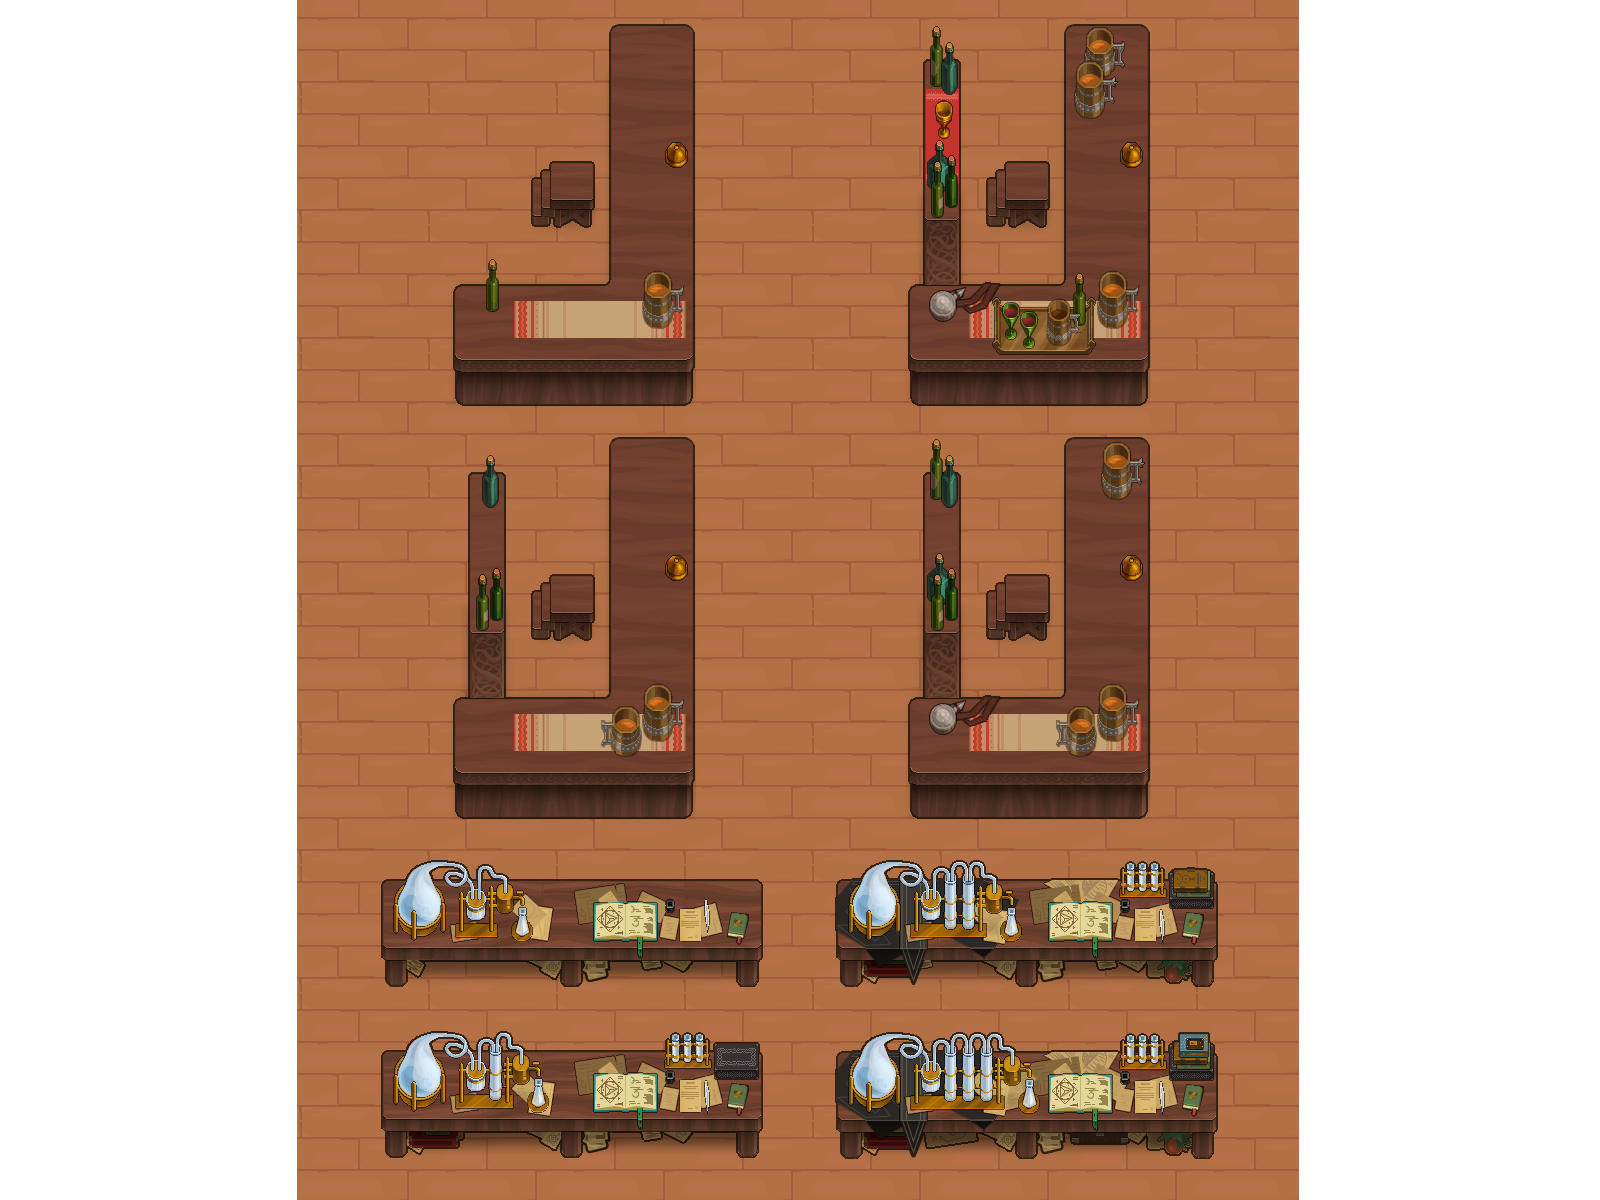 Innkeeper's Story - The alchemist's table and the bar. 2d alchemist alchemy bar furniture game game assets game objects illustration indie game inn medieval props retro game rpg view sprite unity workshop workstation worktable